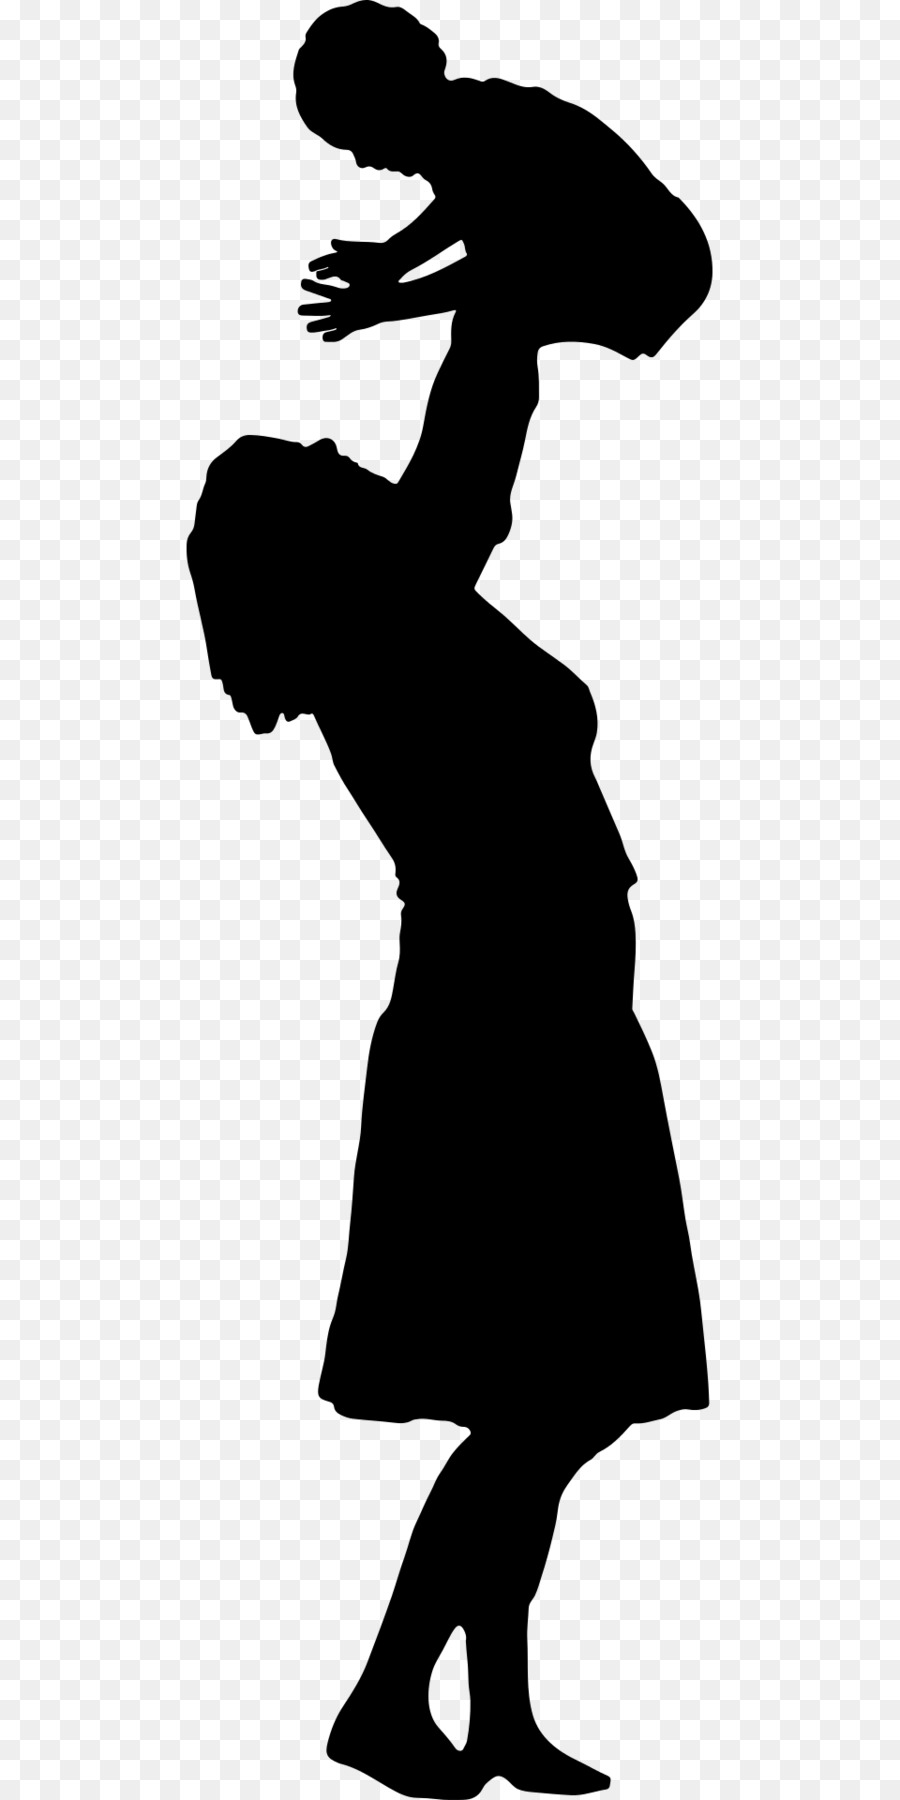 Mother Silhouette Clip art - Silhouette png download - 960*1920 - Free Transparent Mother png Download.